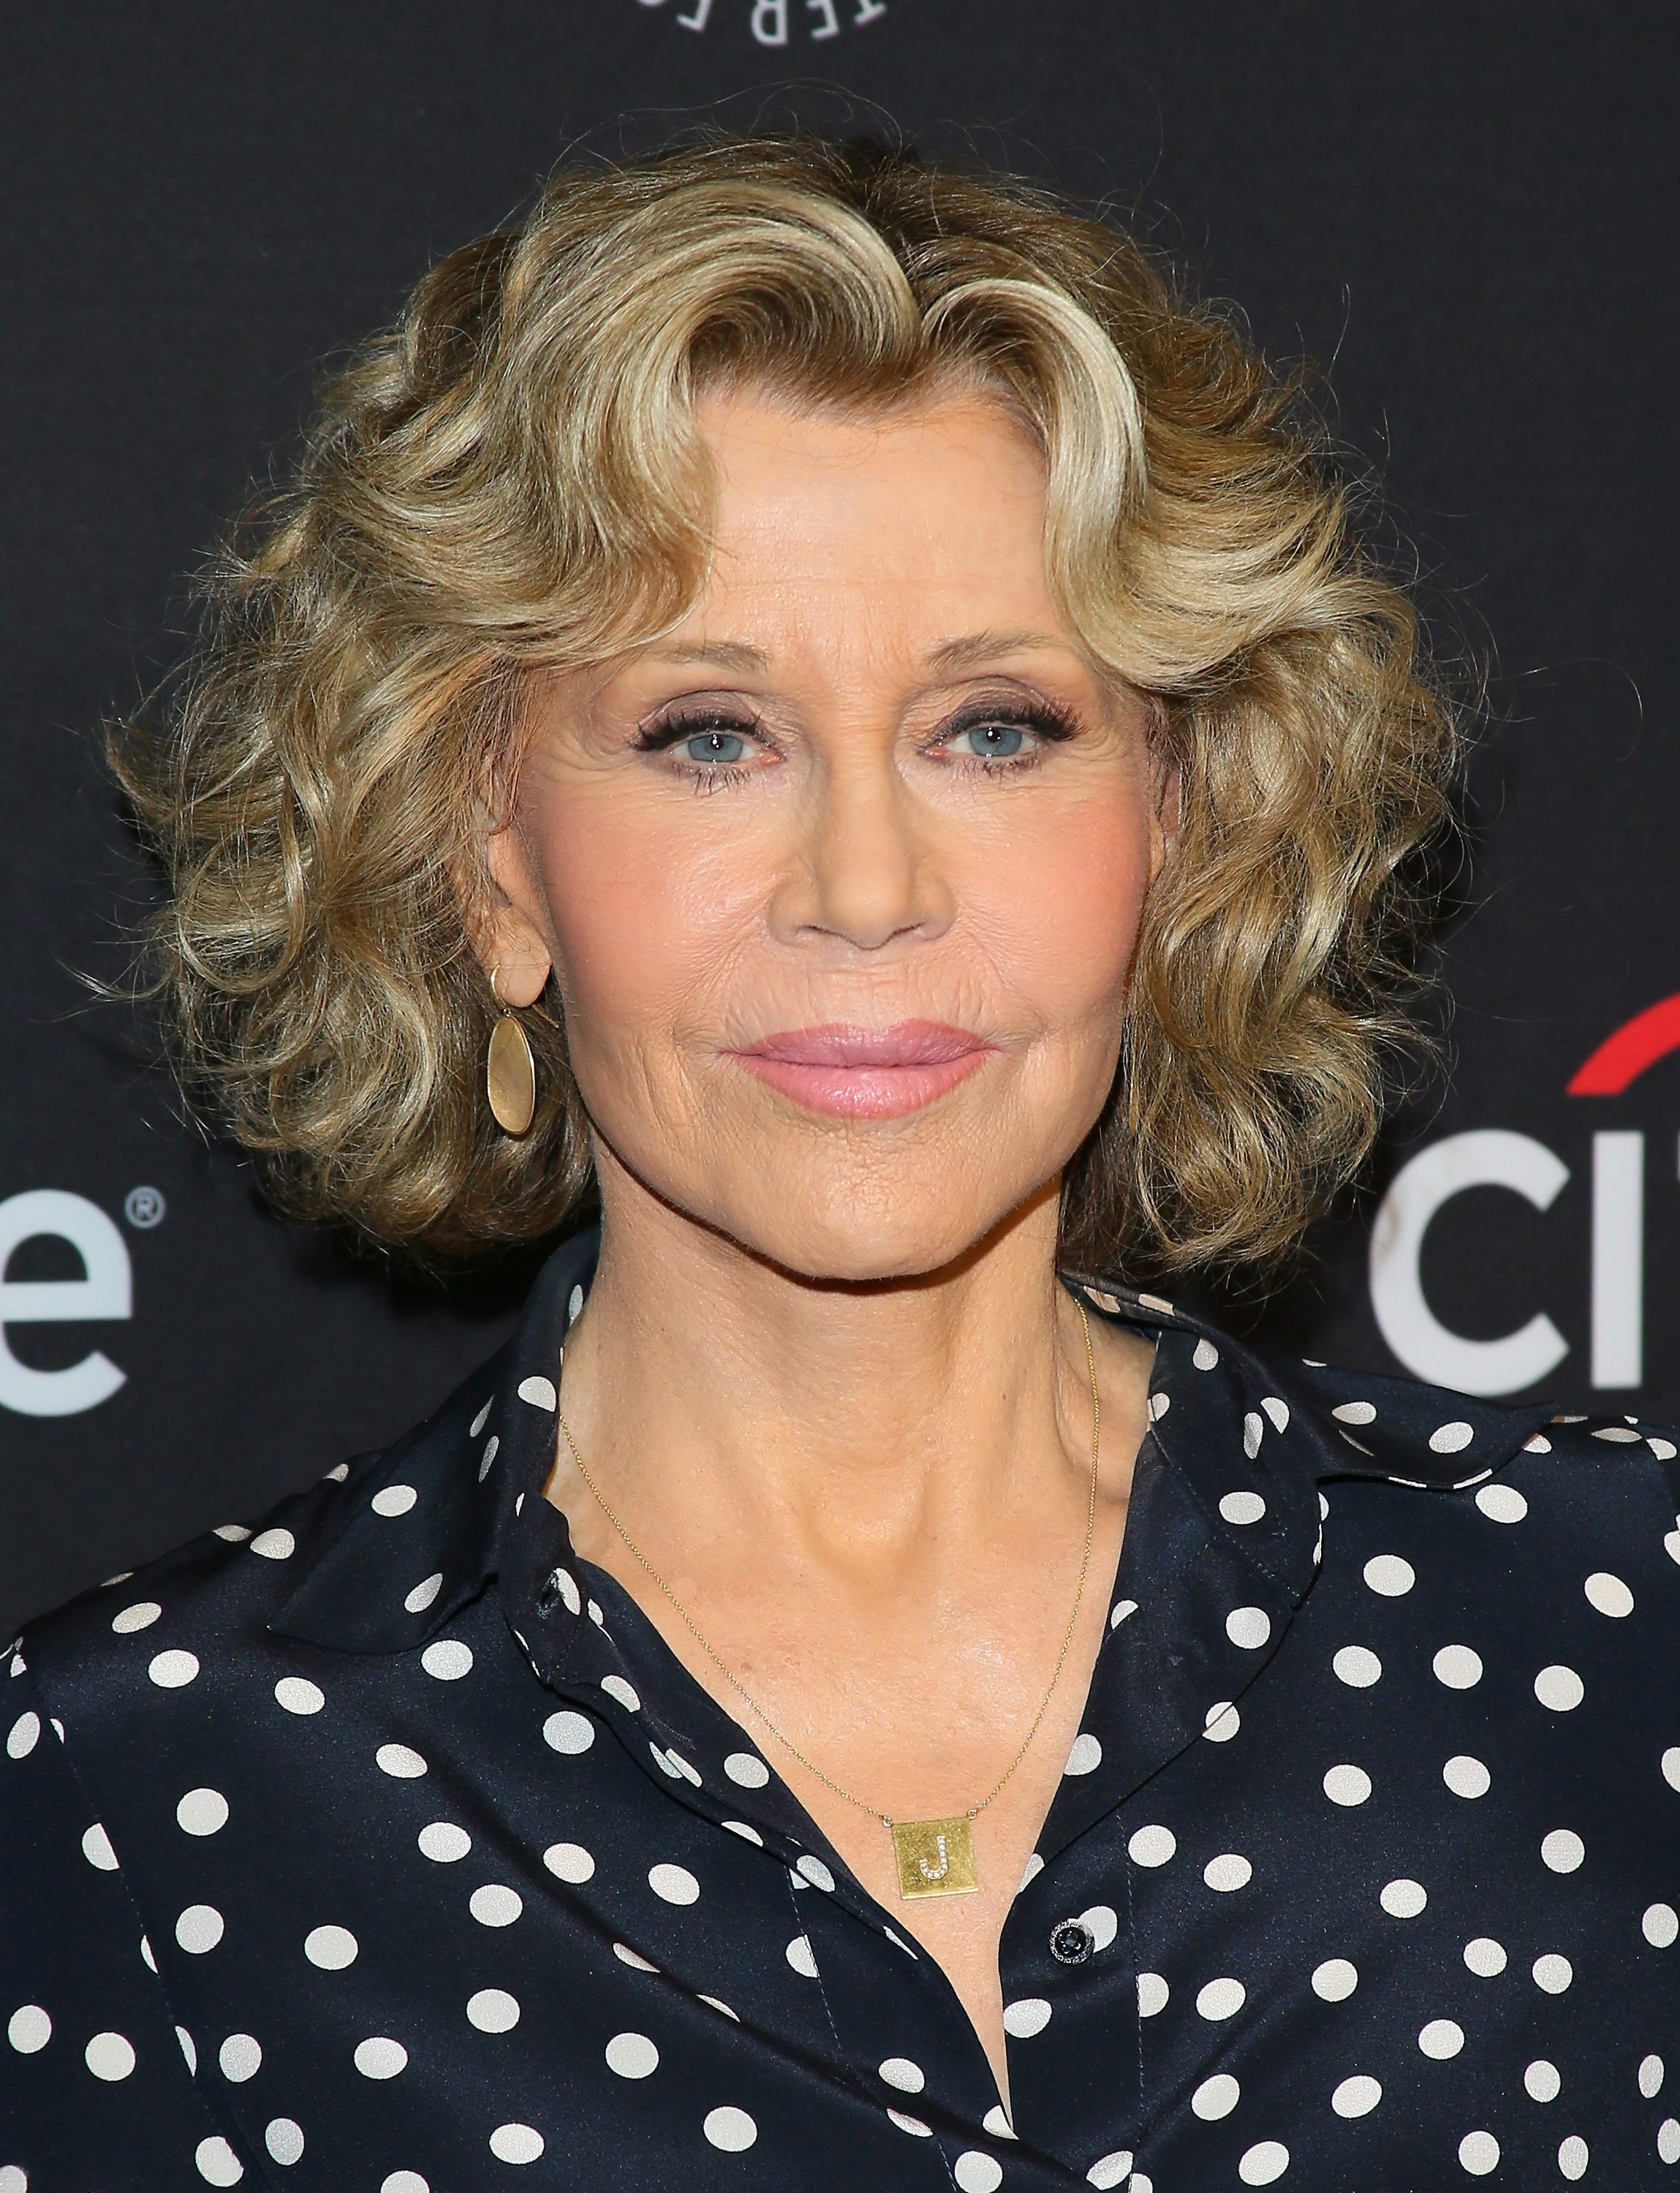 Jane Fonda, 82, Says She Is No Longer Dating after Three Marriages and